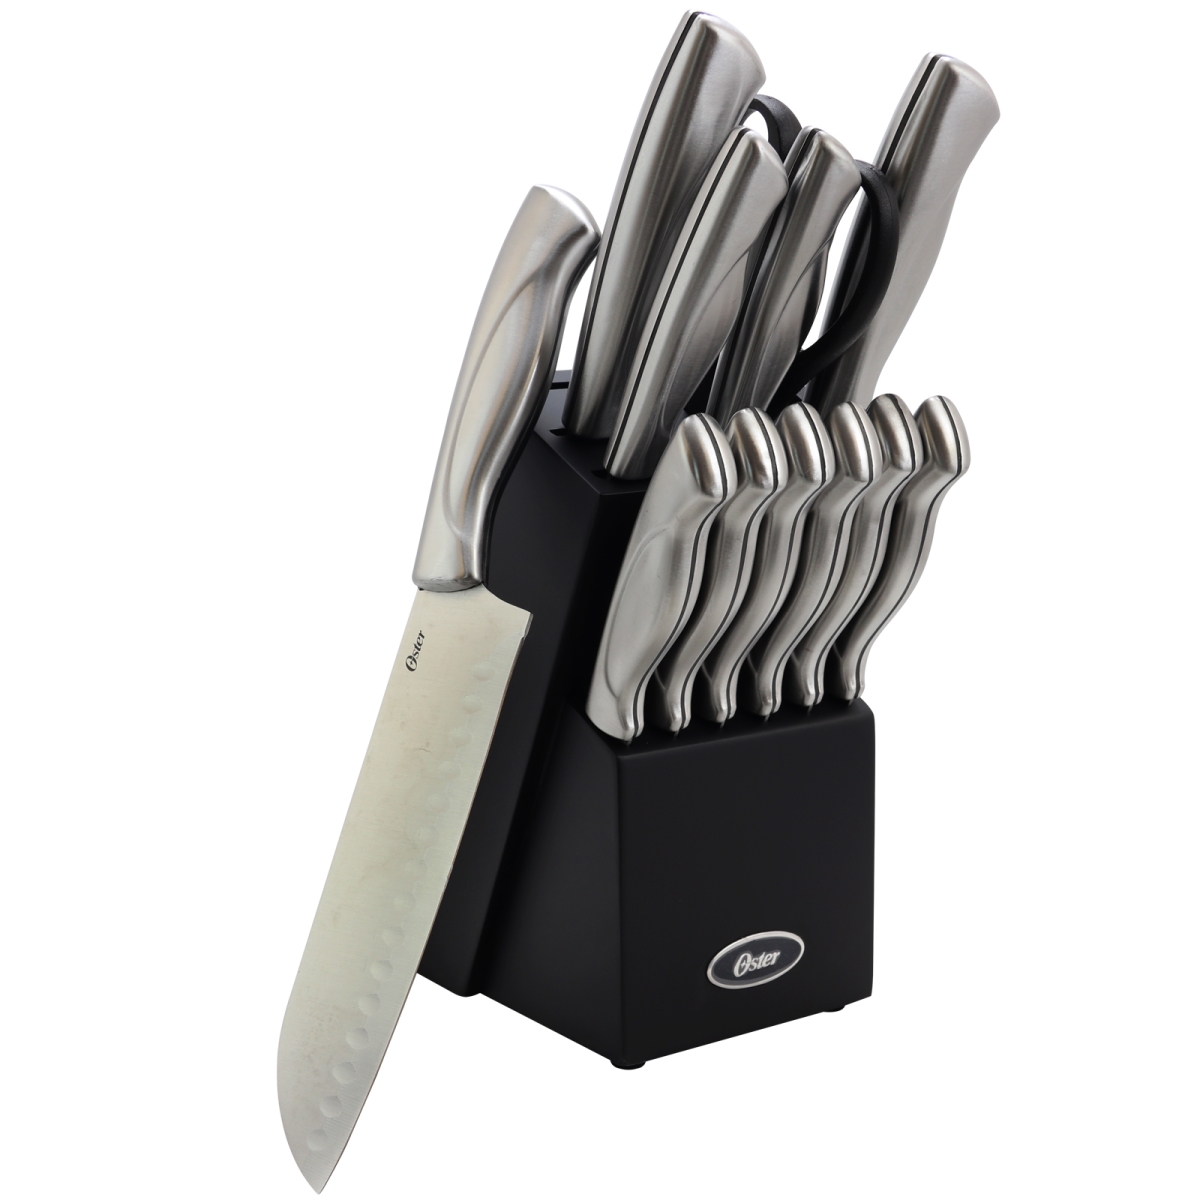 120725.13 Baldivia Stainless Steel Cutlery Set With Black Rubberwood Knife Block - 13 Piece